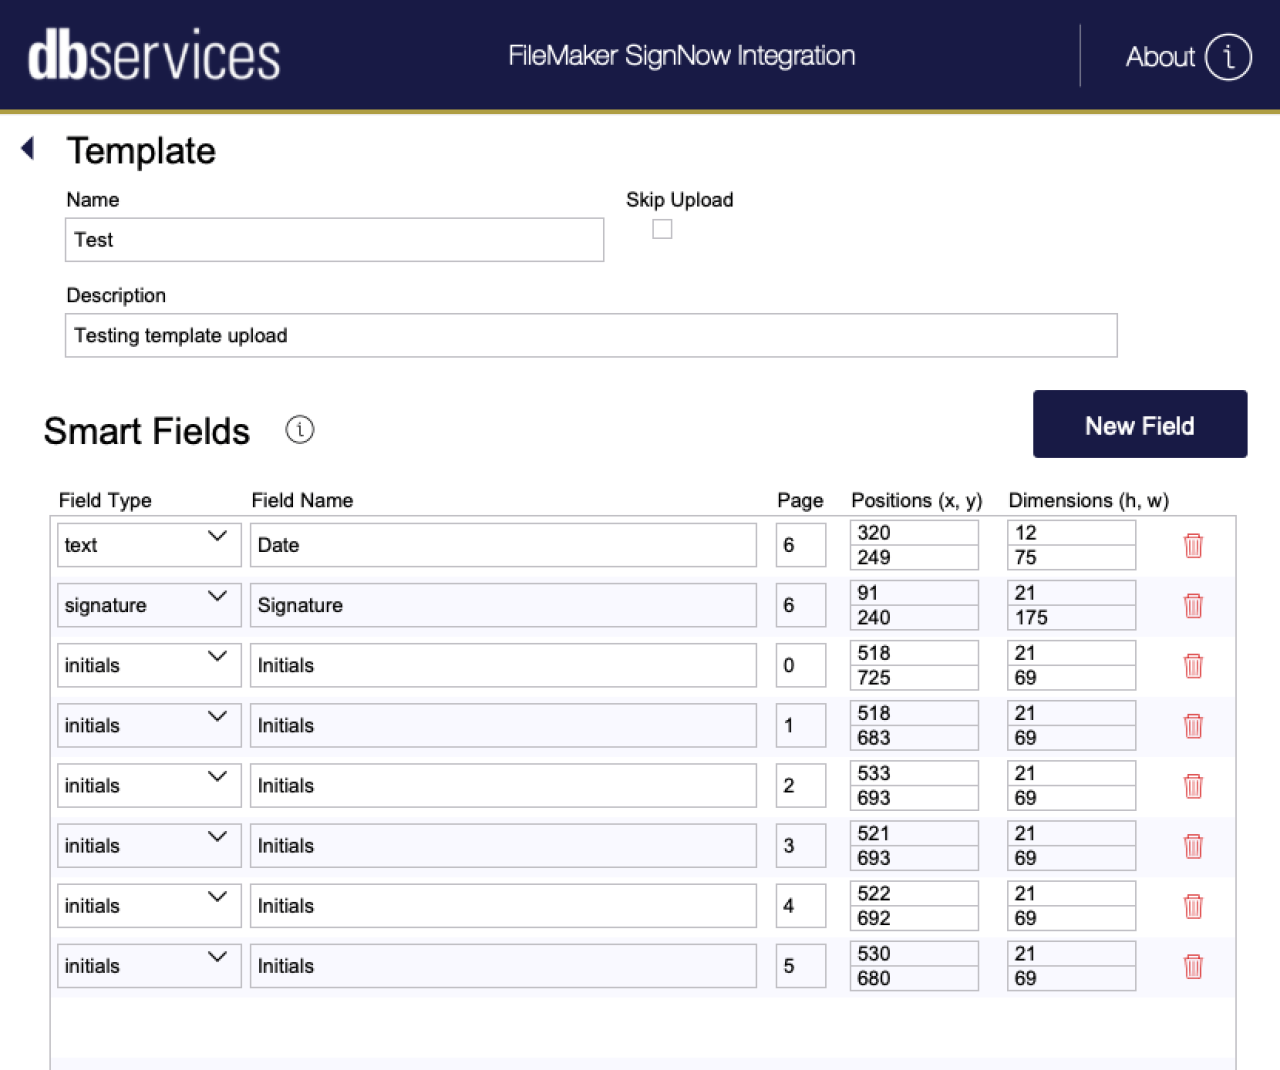 filemaker signnow integration pulled in smart fields.